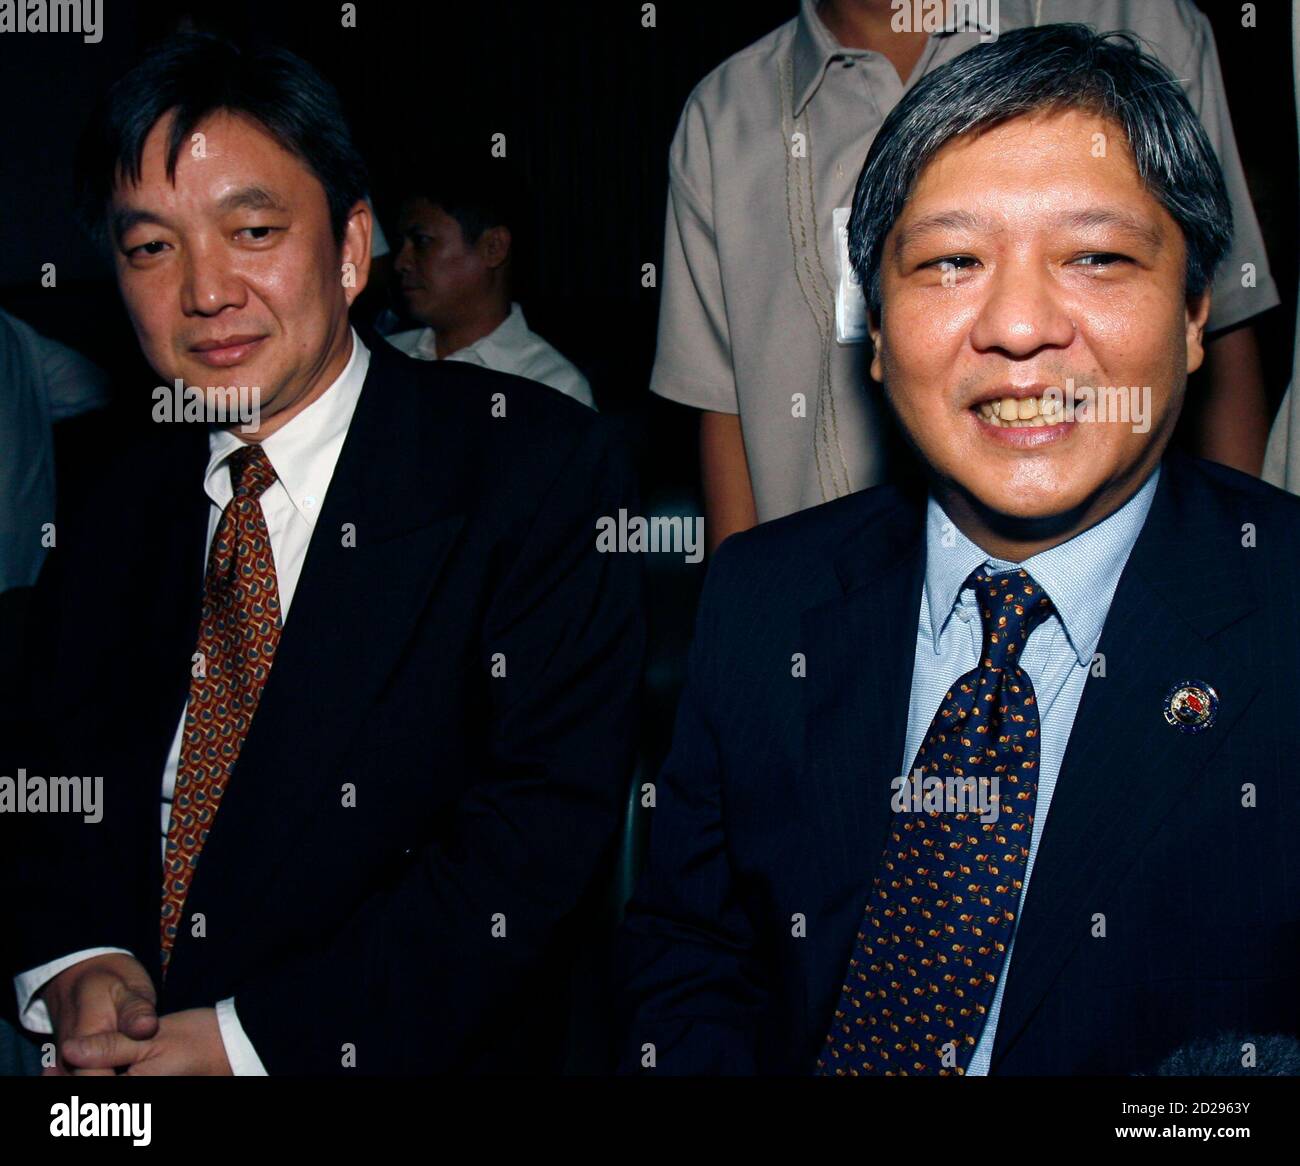 Ferdinand Bongbong Marcos Jr R A Philippine Congressman And Son Of Late Dictator Ferdinand Marcos Sits With His Lawyer Joseph Taddy Before The Start Of A Hearing At The Anti Graft Court In